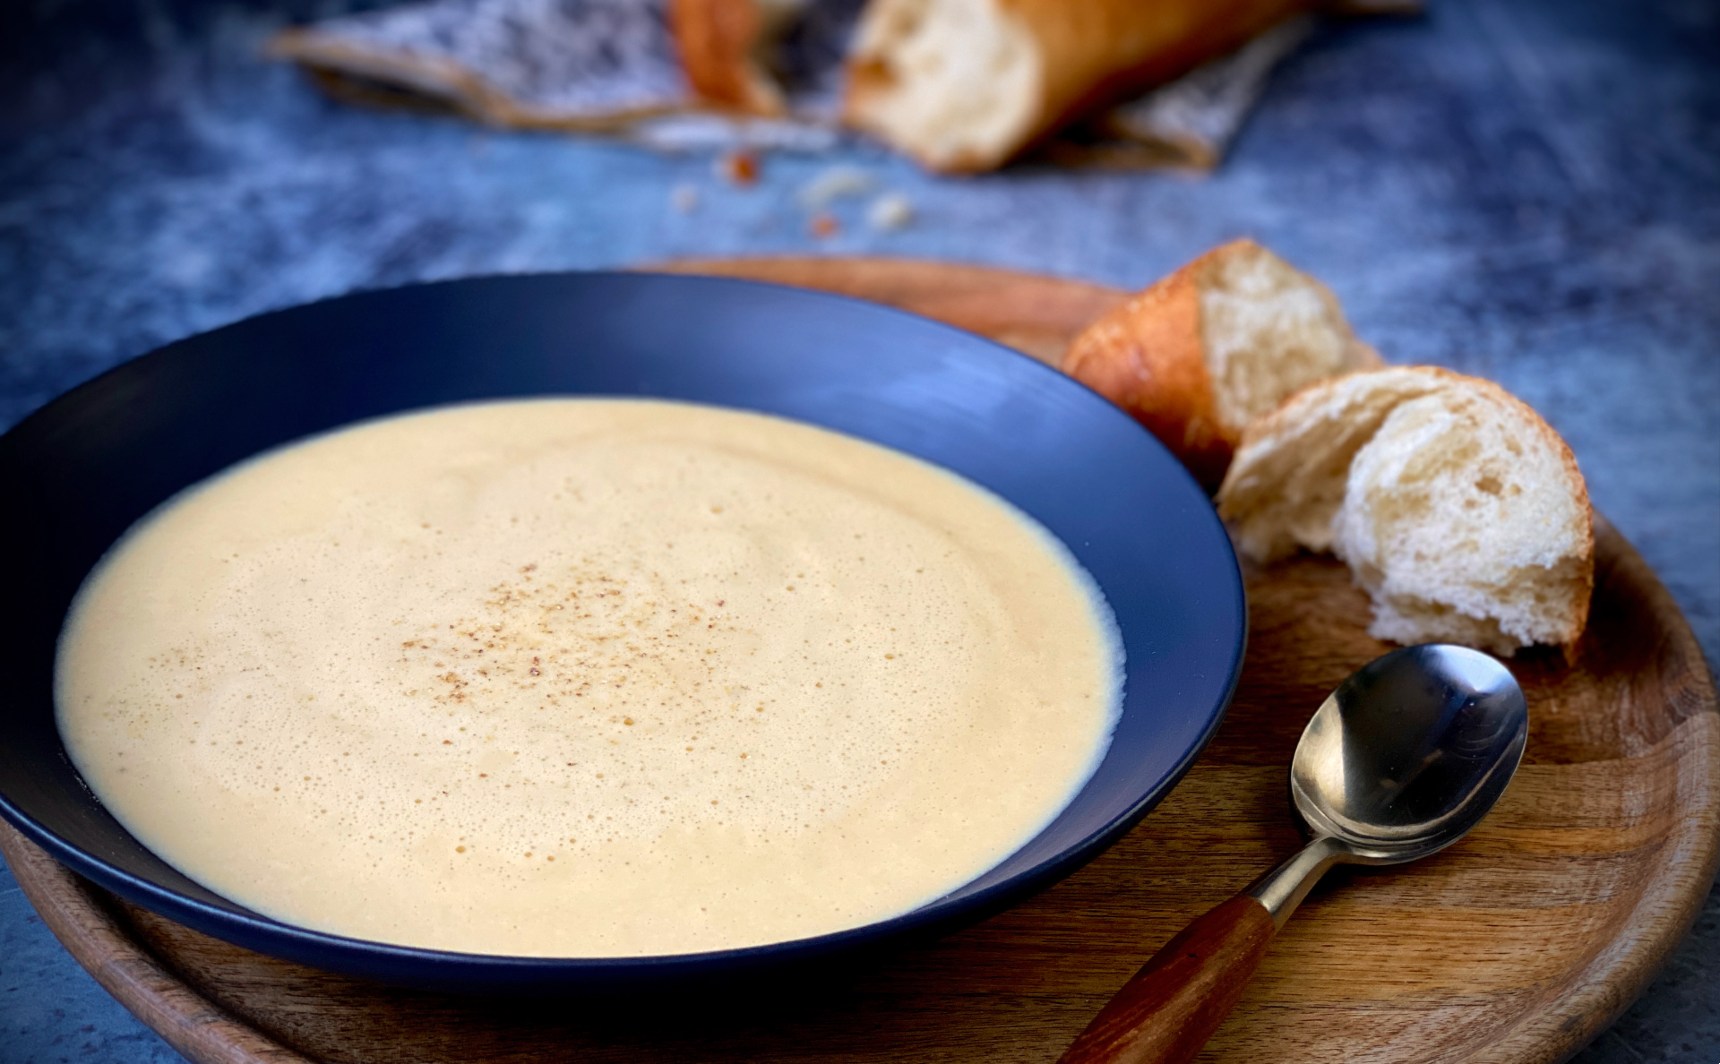 One of the best winter soups: A bowl of cheese soup with torn pieces of baguette and a spoon.